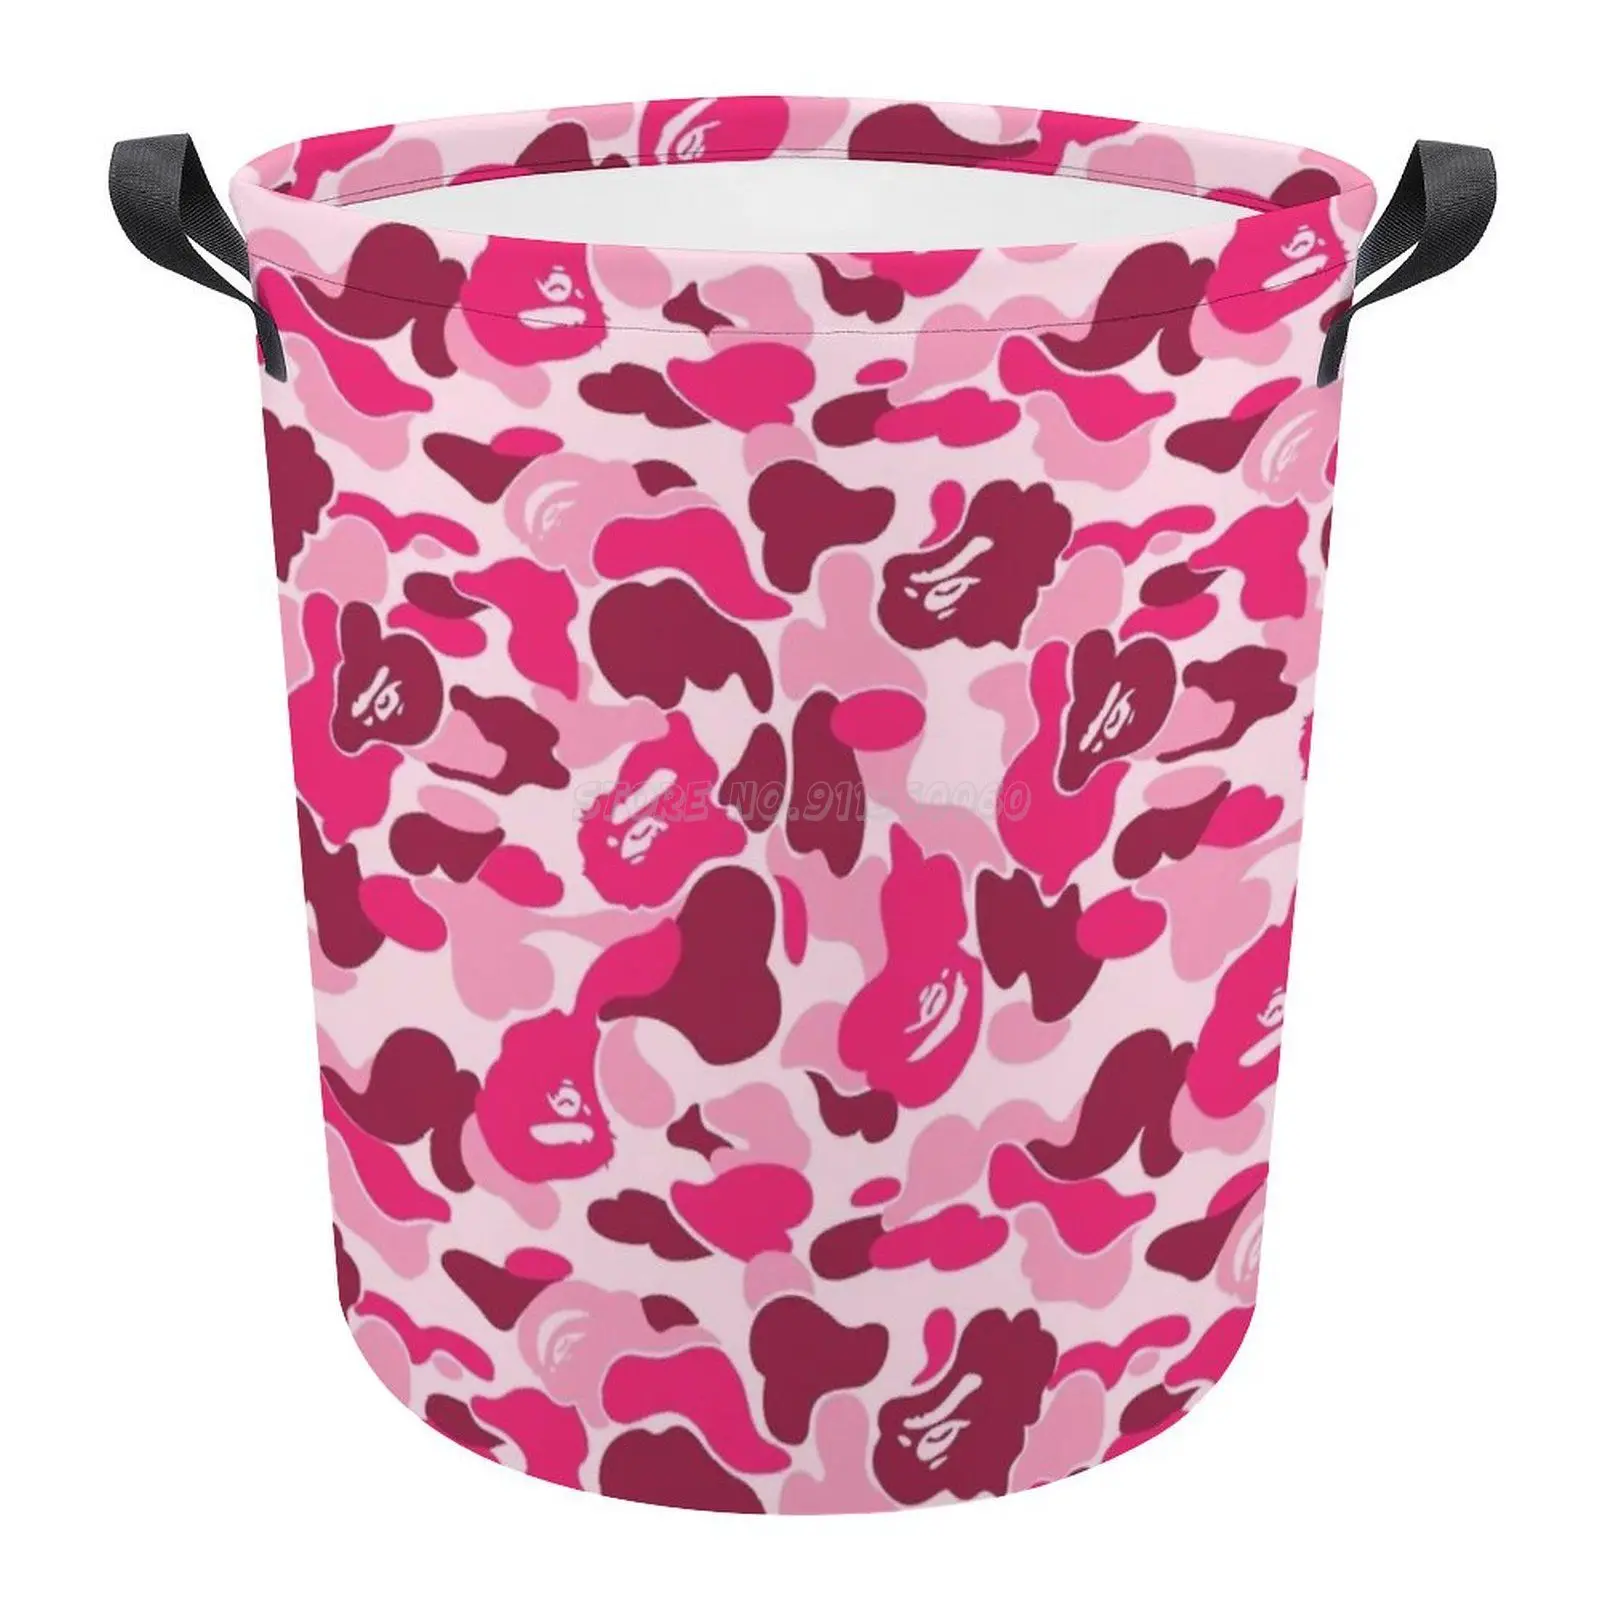 Details about   Waterproof Portable Laundry Basket Oxford Collapsible Metal Dirty Cloth Storage 